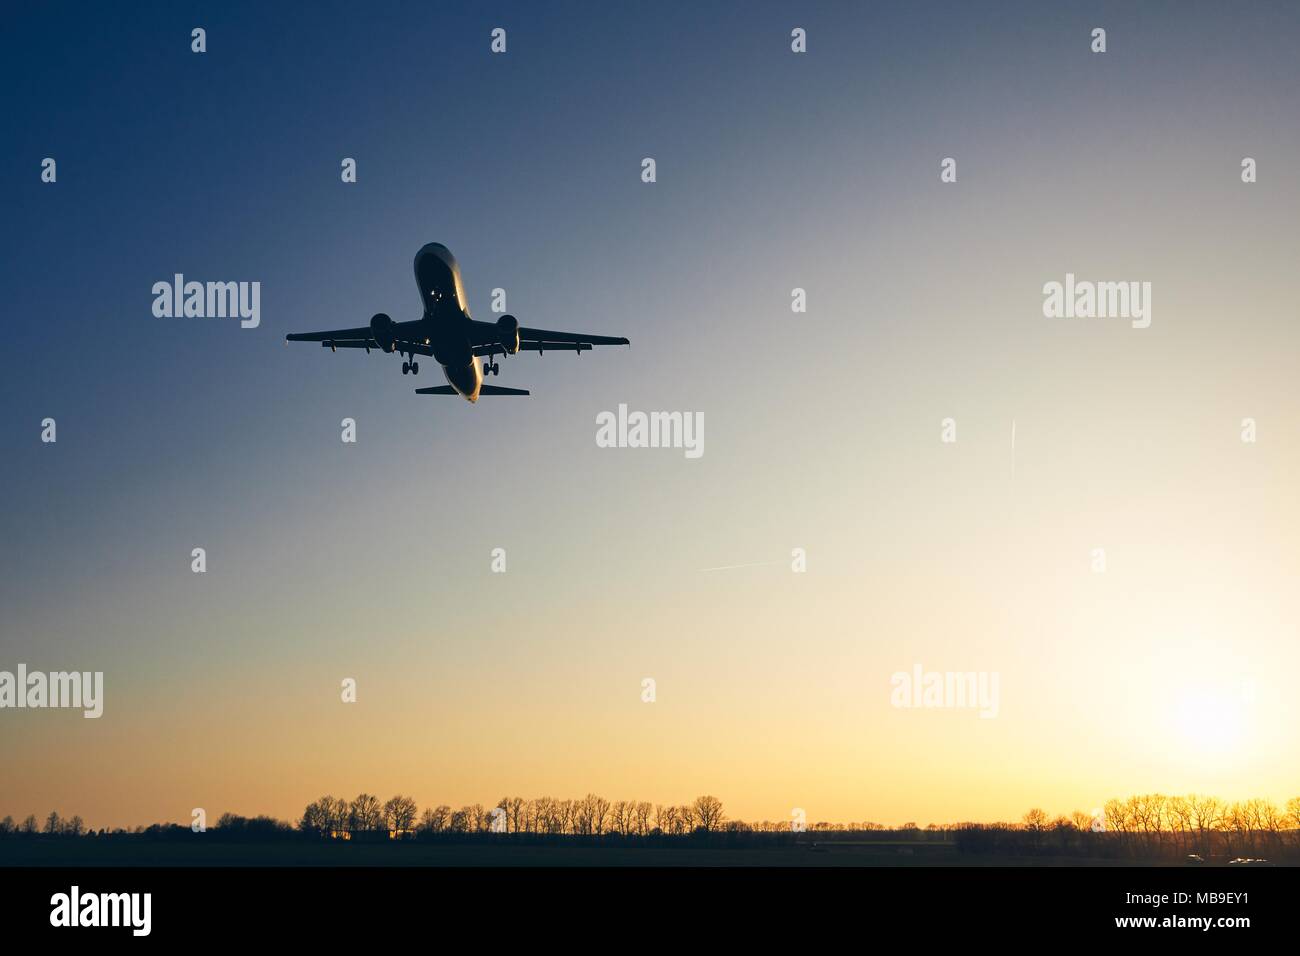 Silhouette of the airplane landing against moody sky at golden sunset. Stock Photo